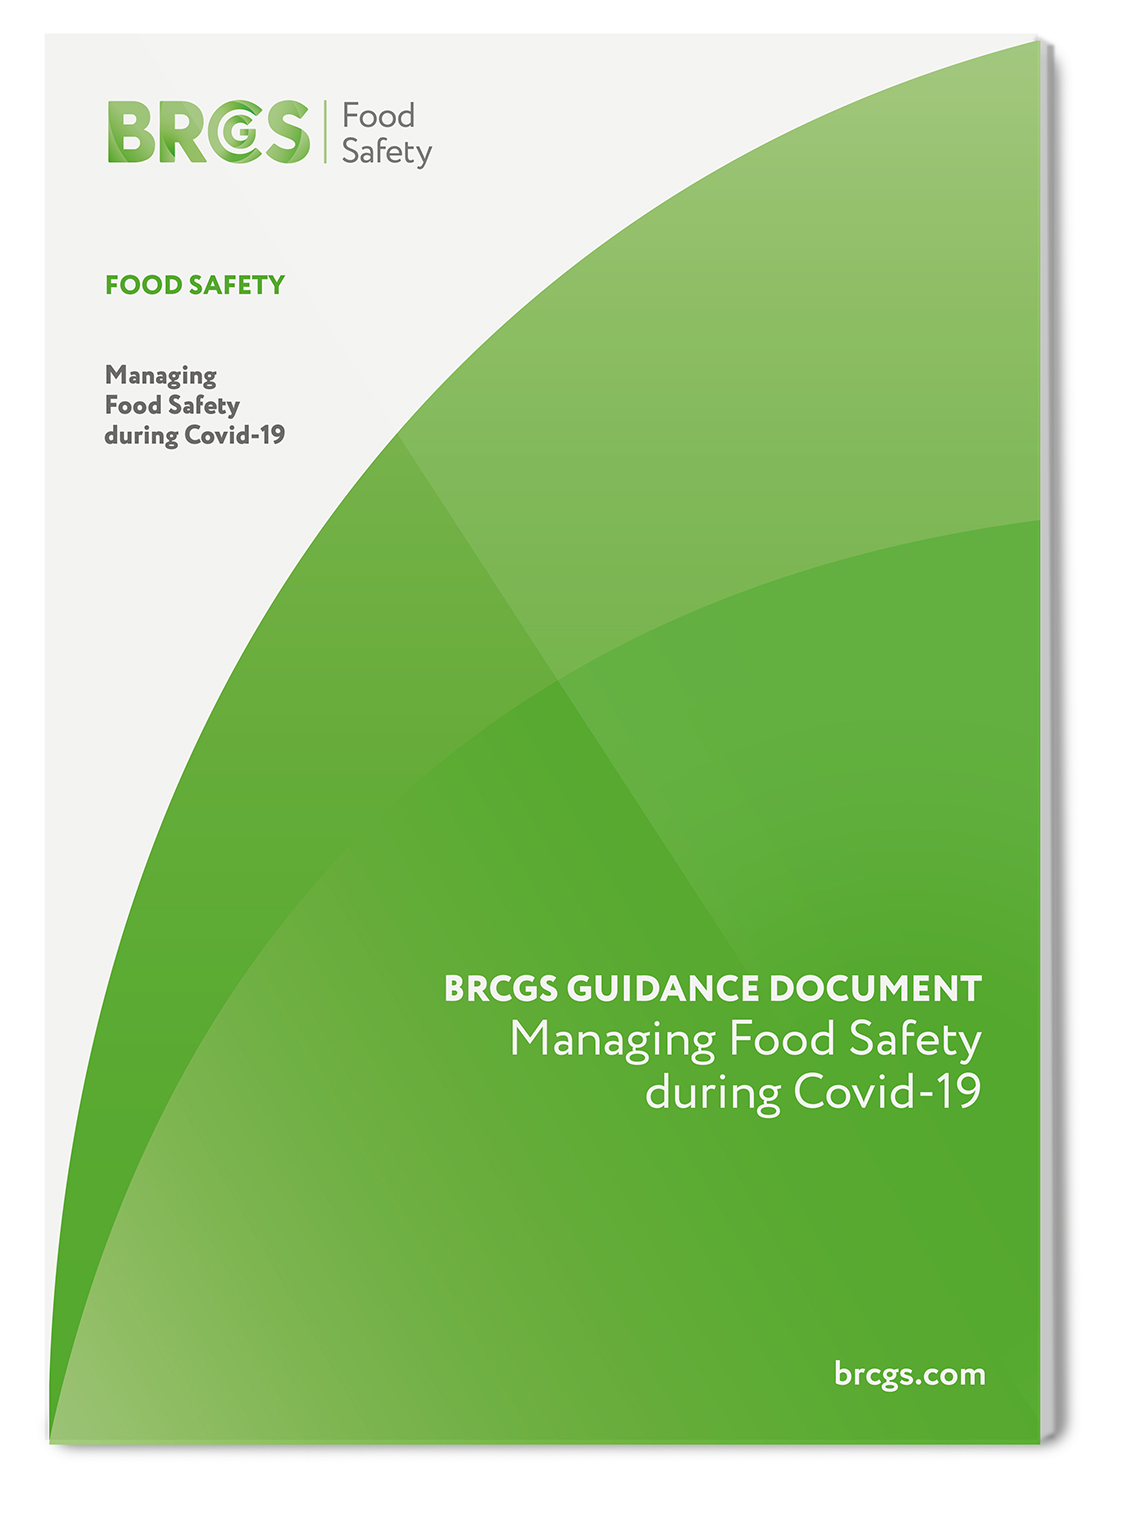 Guidance Document Managing Food Safety during Covid-19